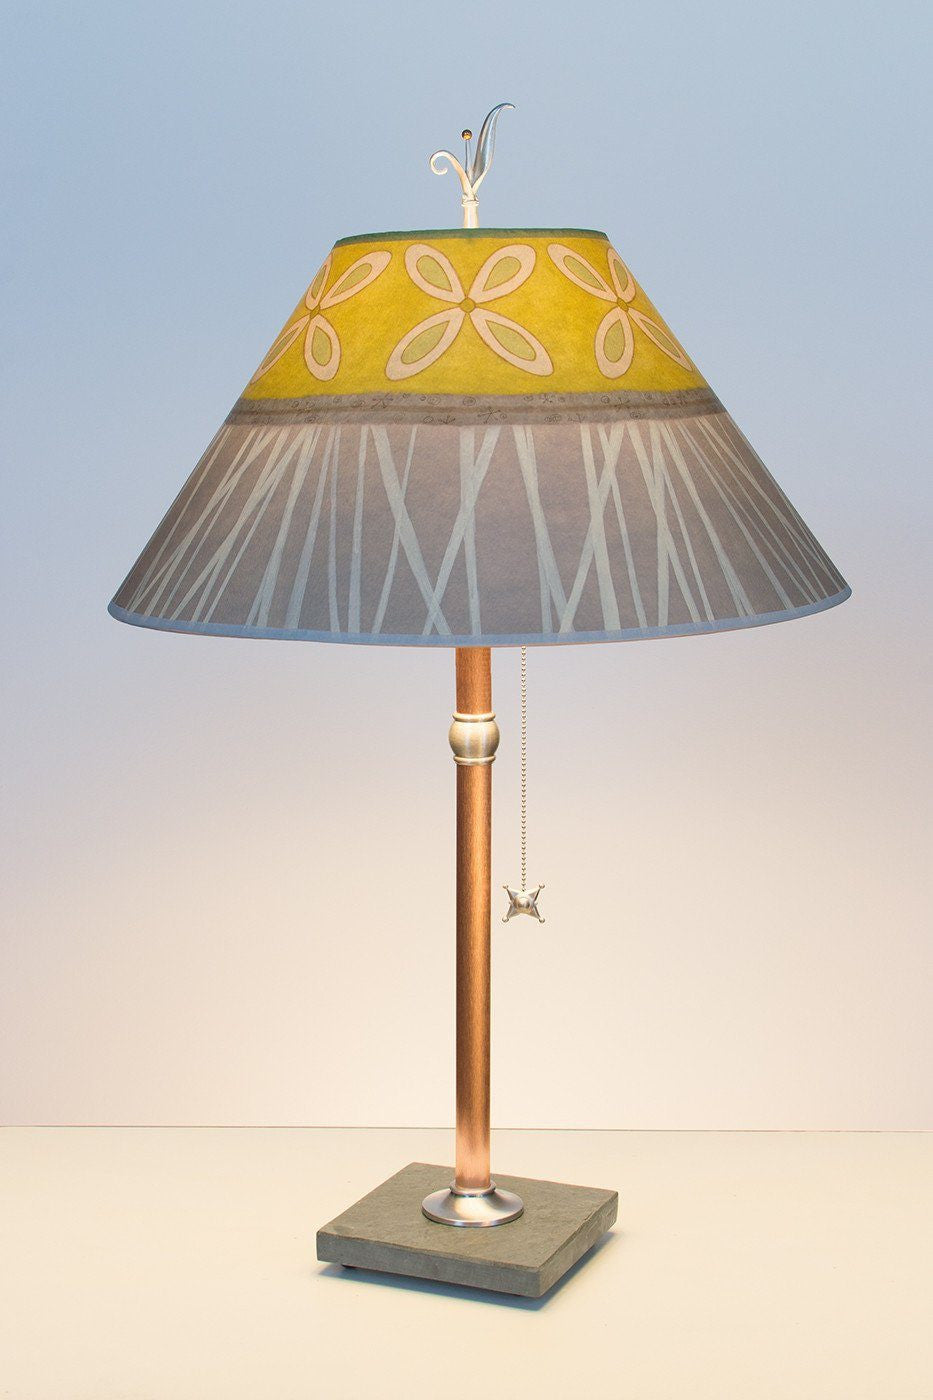 Copper Table Lamp on Vermont Slate with Large Conical Shade in Kiwi